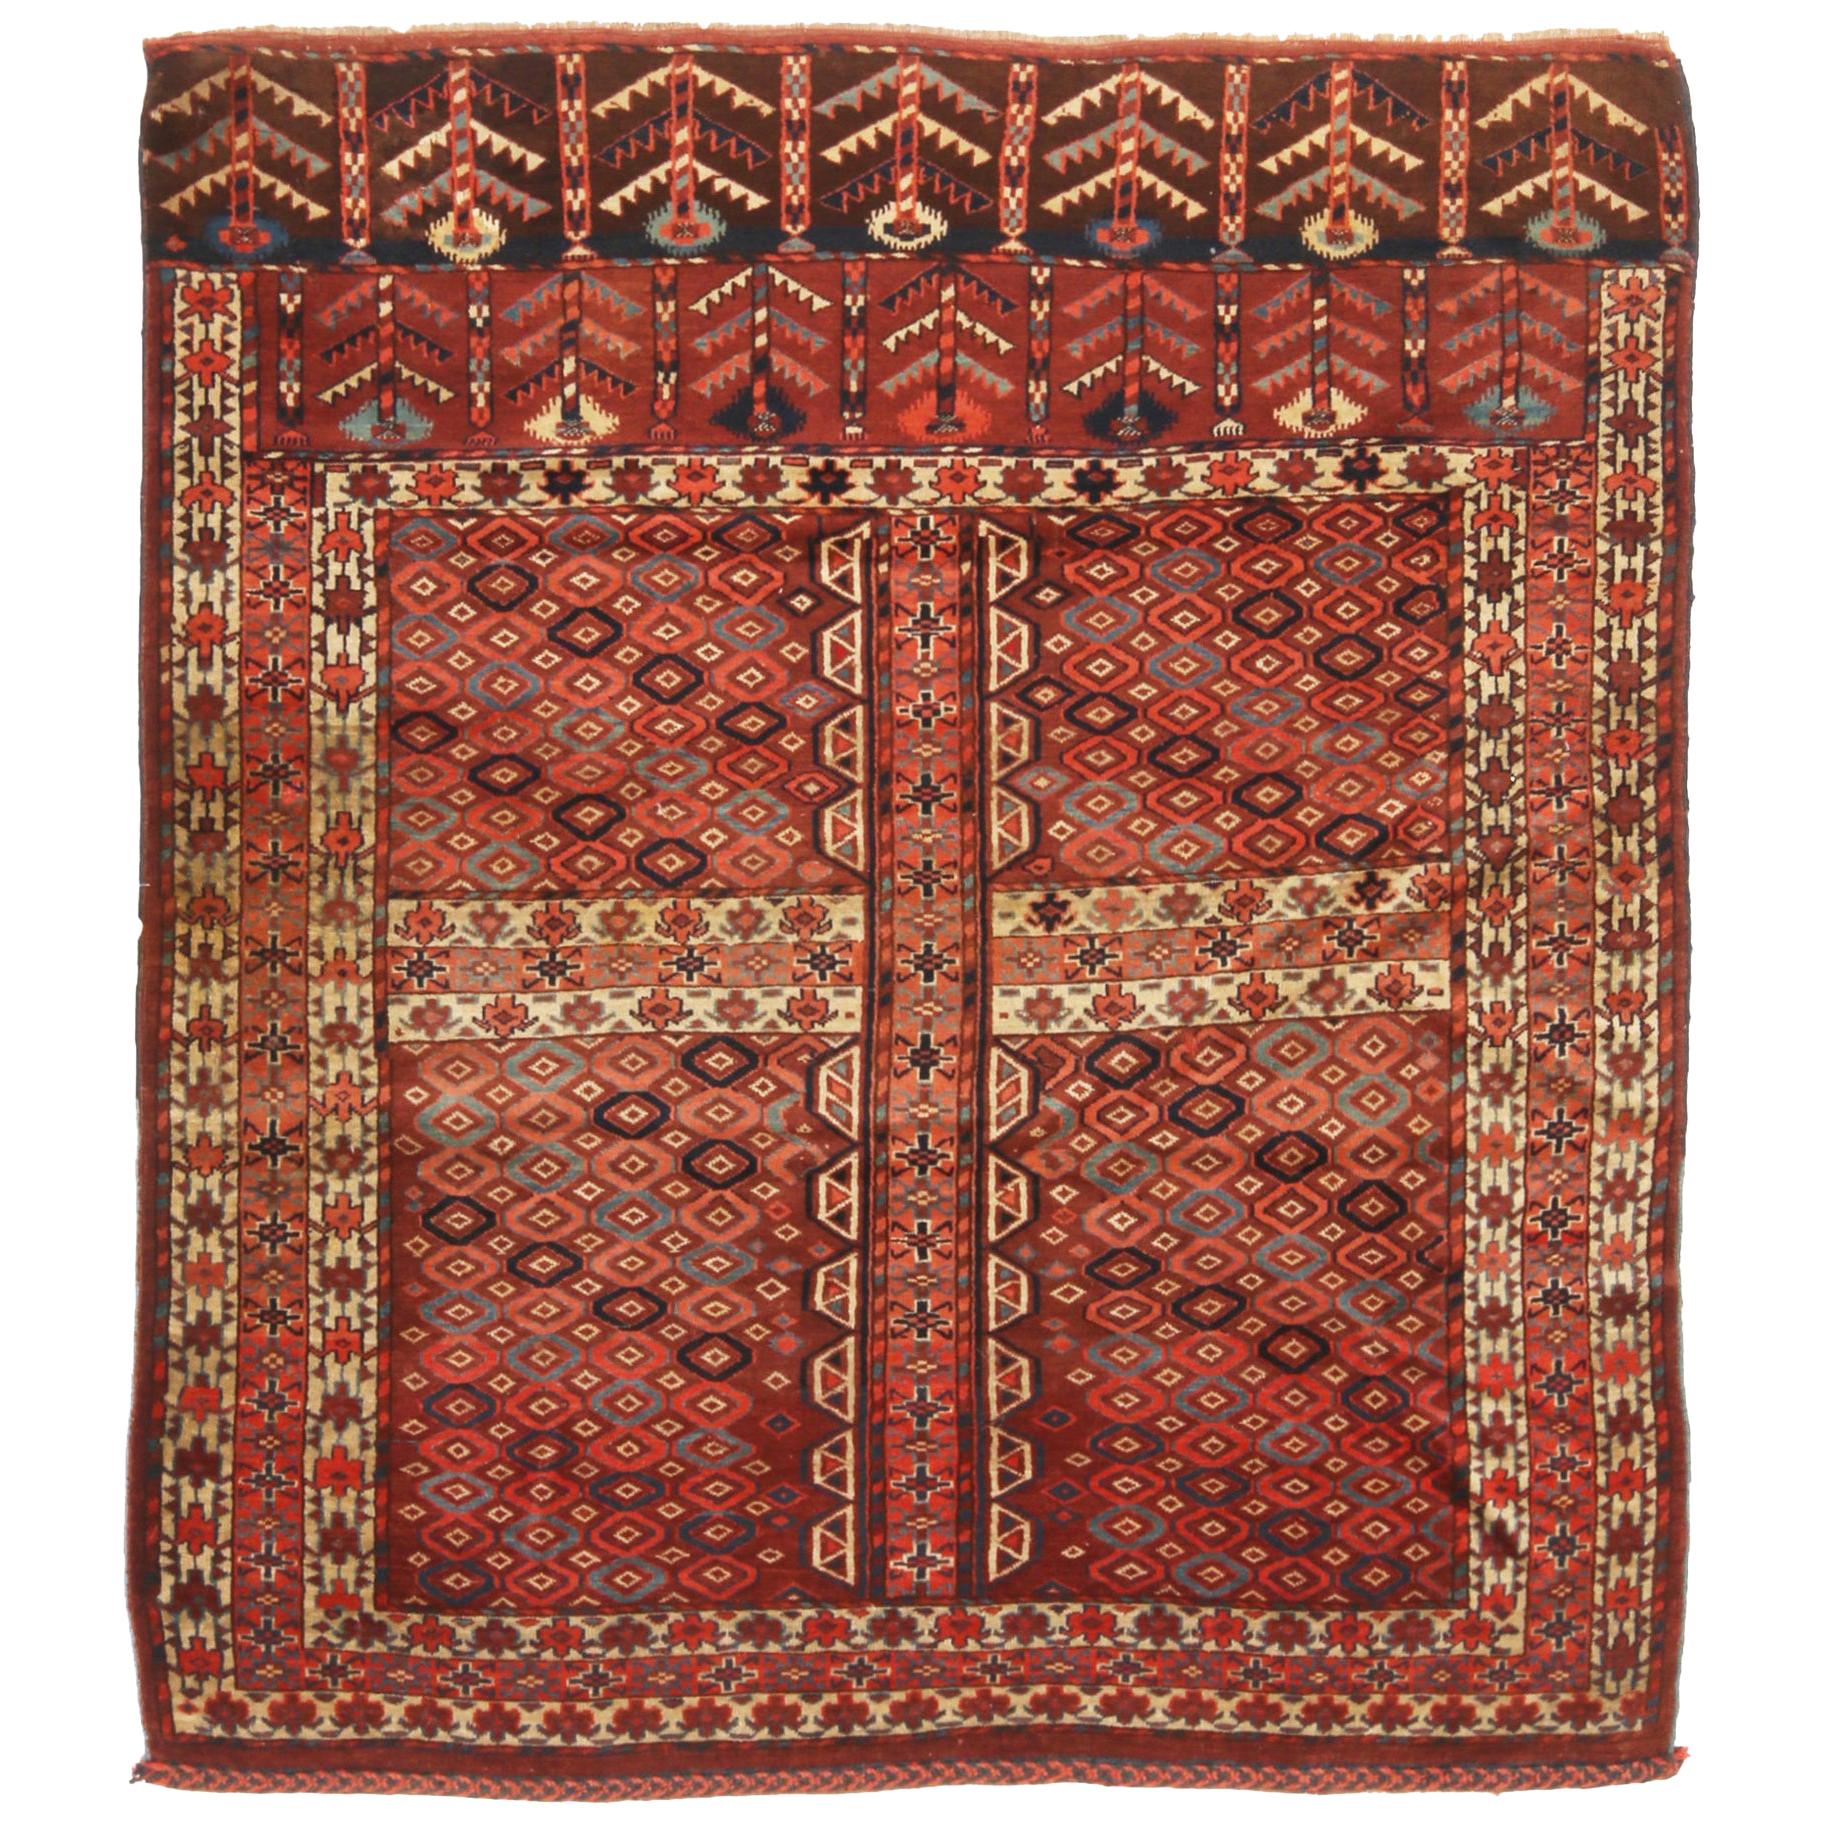 Antique Hachli Transitional Rug in Red, Beige Geometric Pattern by Rug & Kilim